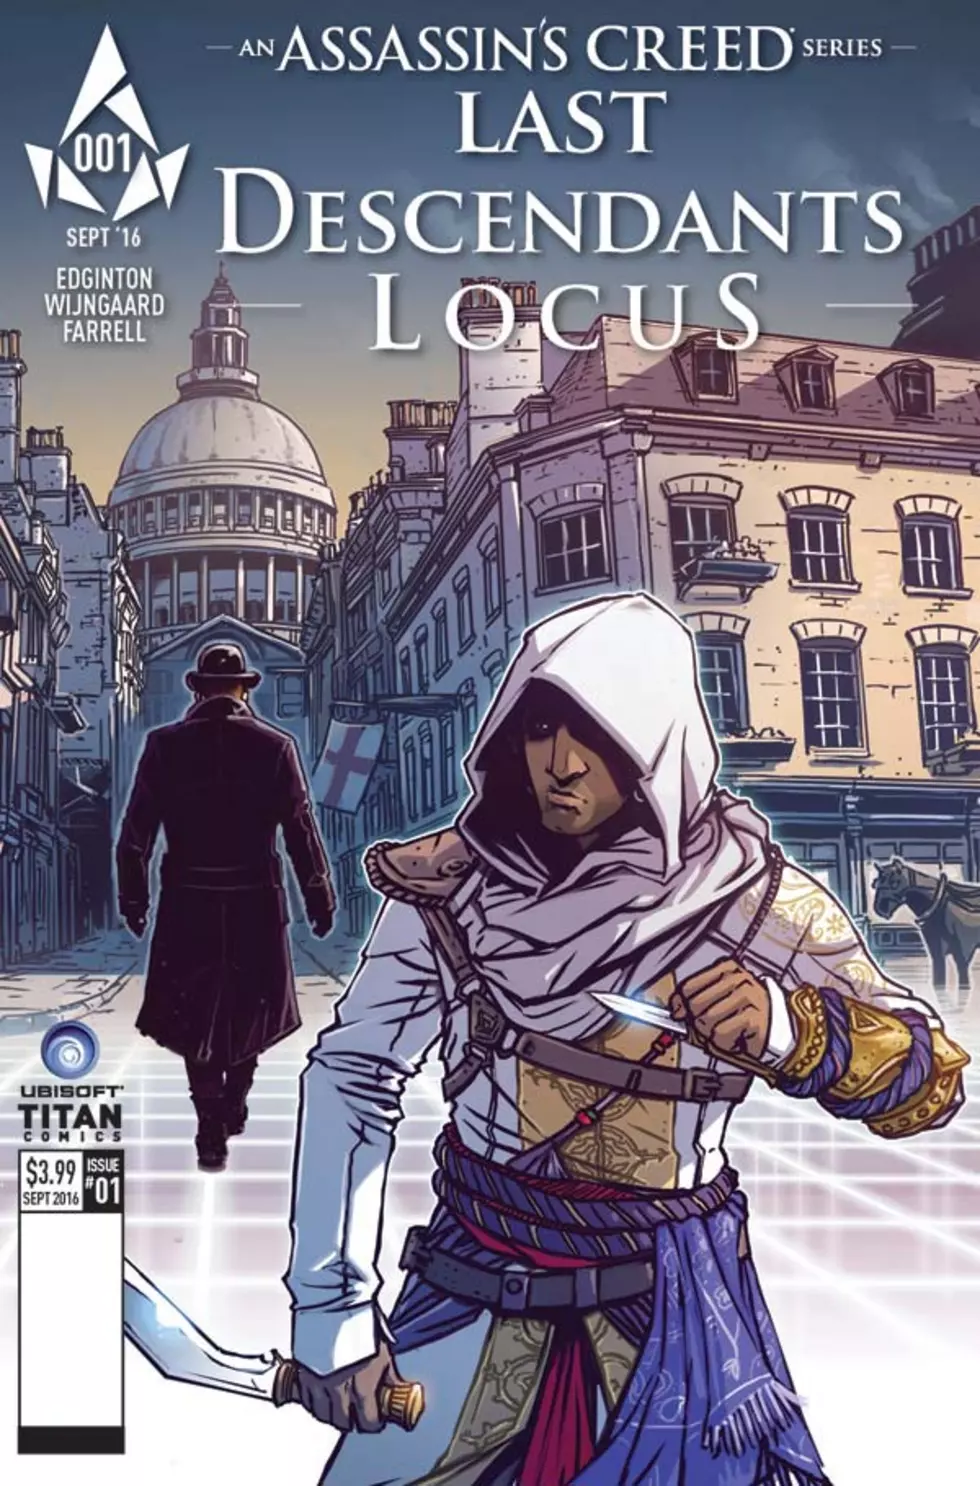 Cut To The Chase In &#8216;Assassin&#8217;s Creed: Last Descendants &#8211; Locus&#8217; #1 [Preview]